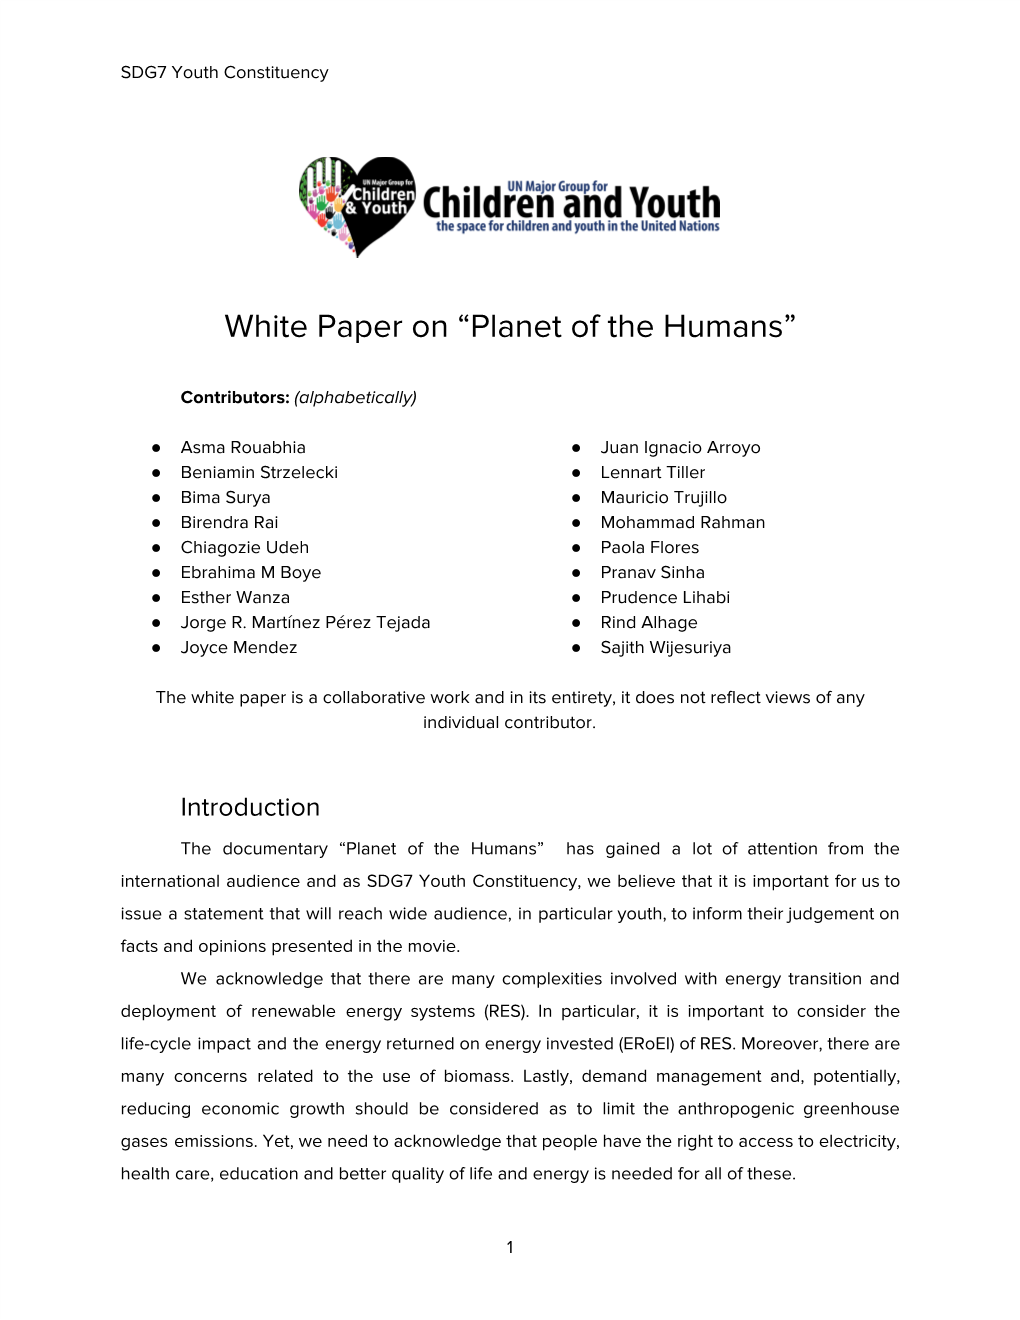 White Paper on “Planet of the Humans”